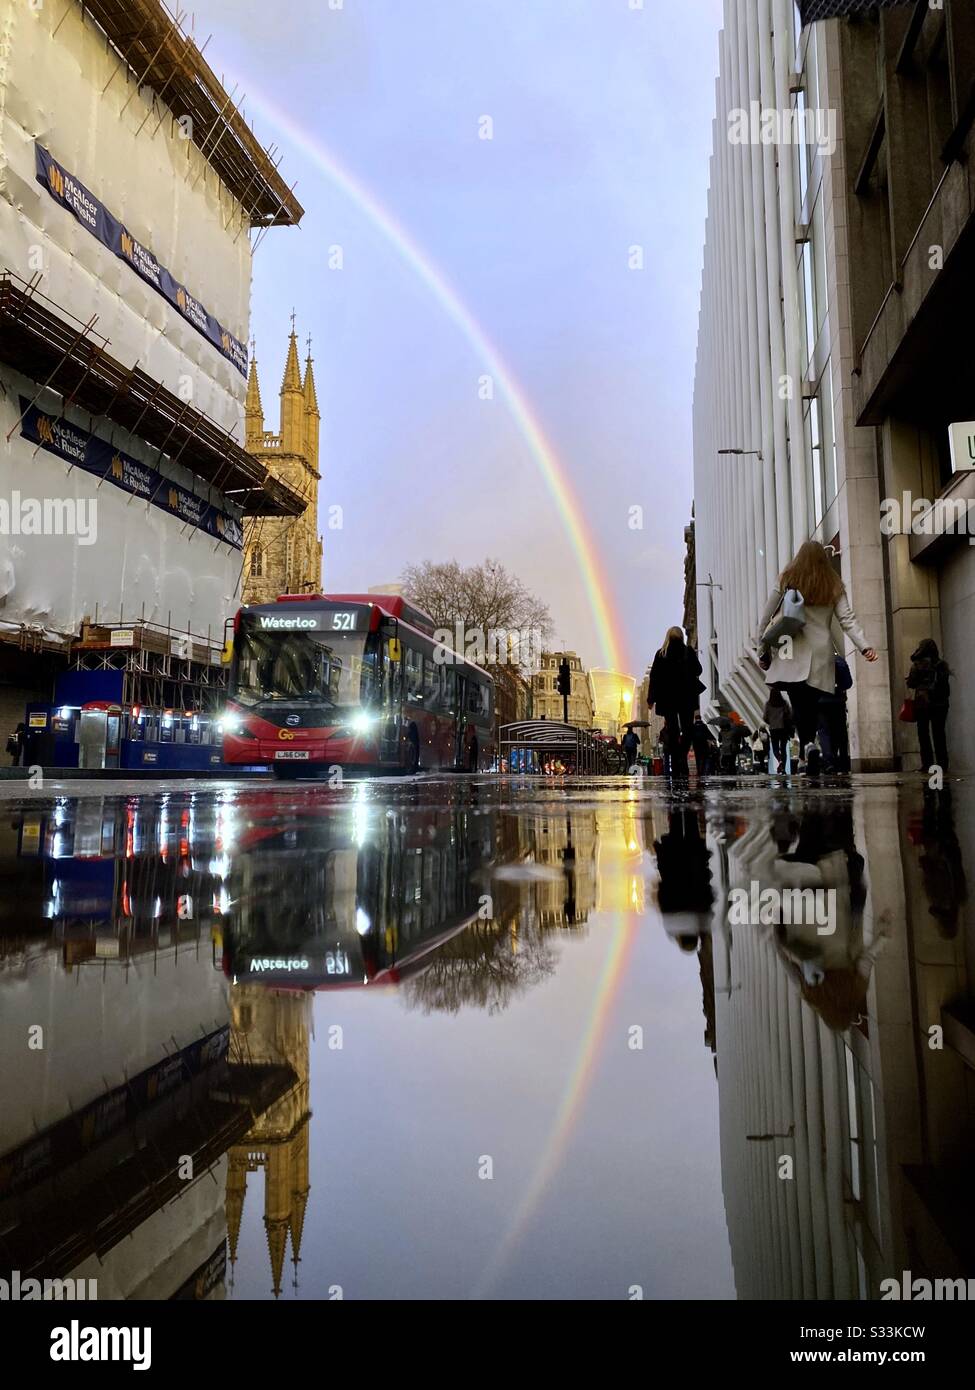 UK Weather: A rainbow shines over the Walkie Talkie building, as it is reflected on a rainy street in Holborn Viaduct, London, England. Stock Photo